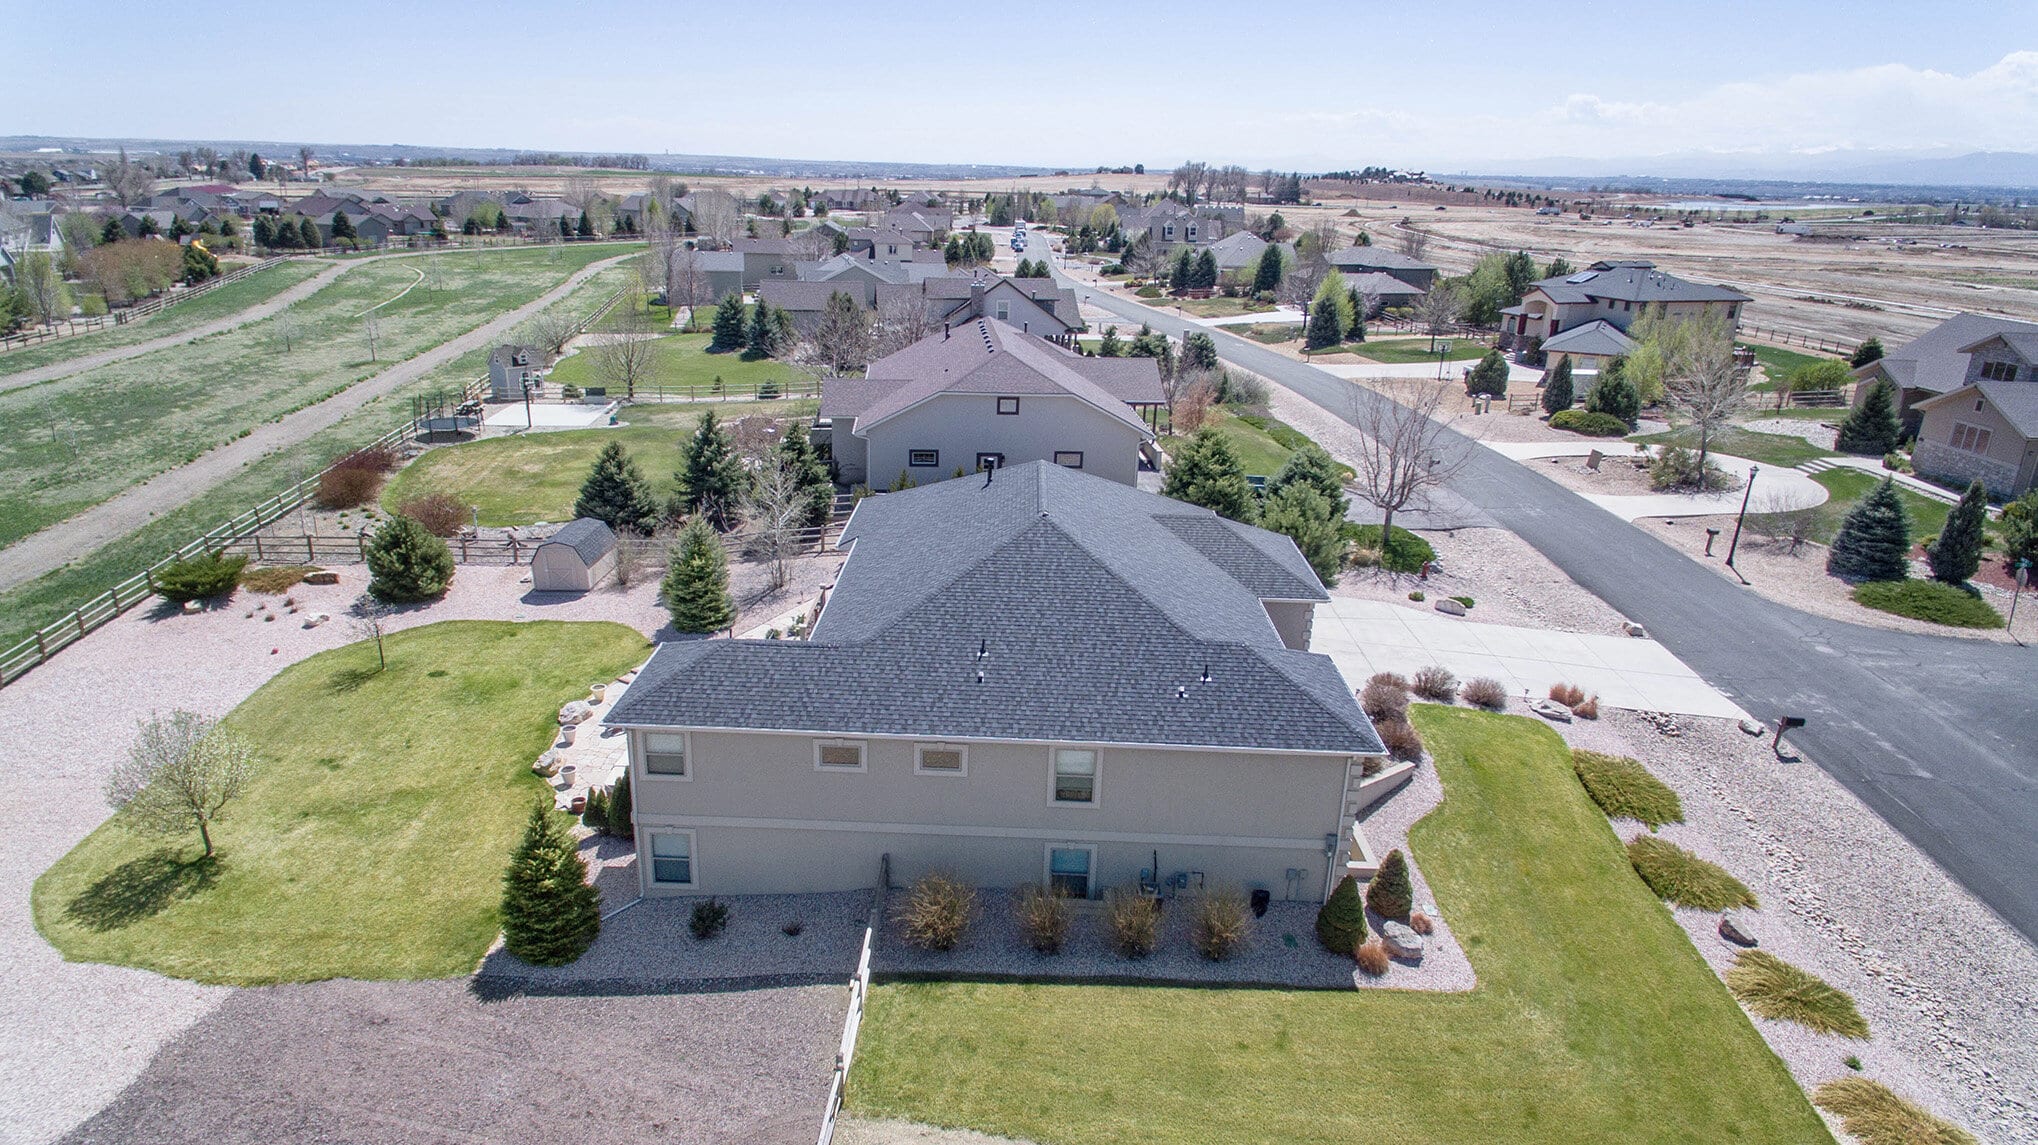 Aerial view of a large home in a Colorado neighborhood